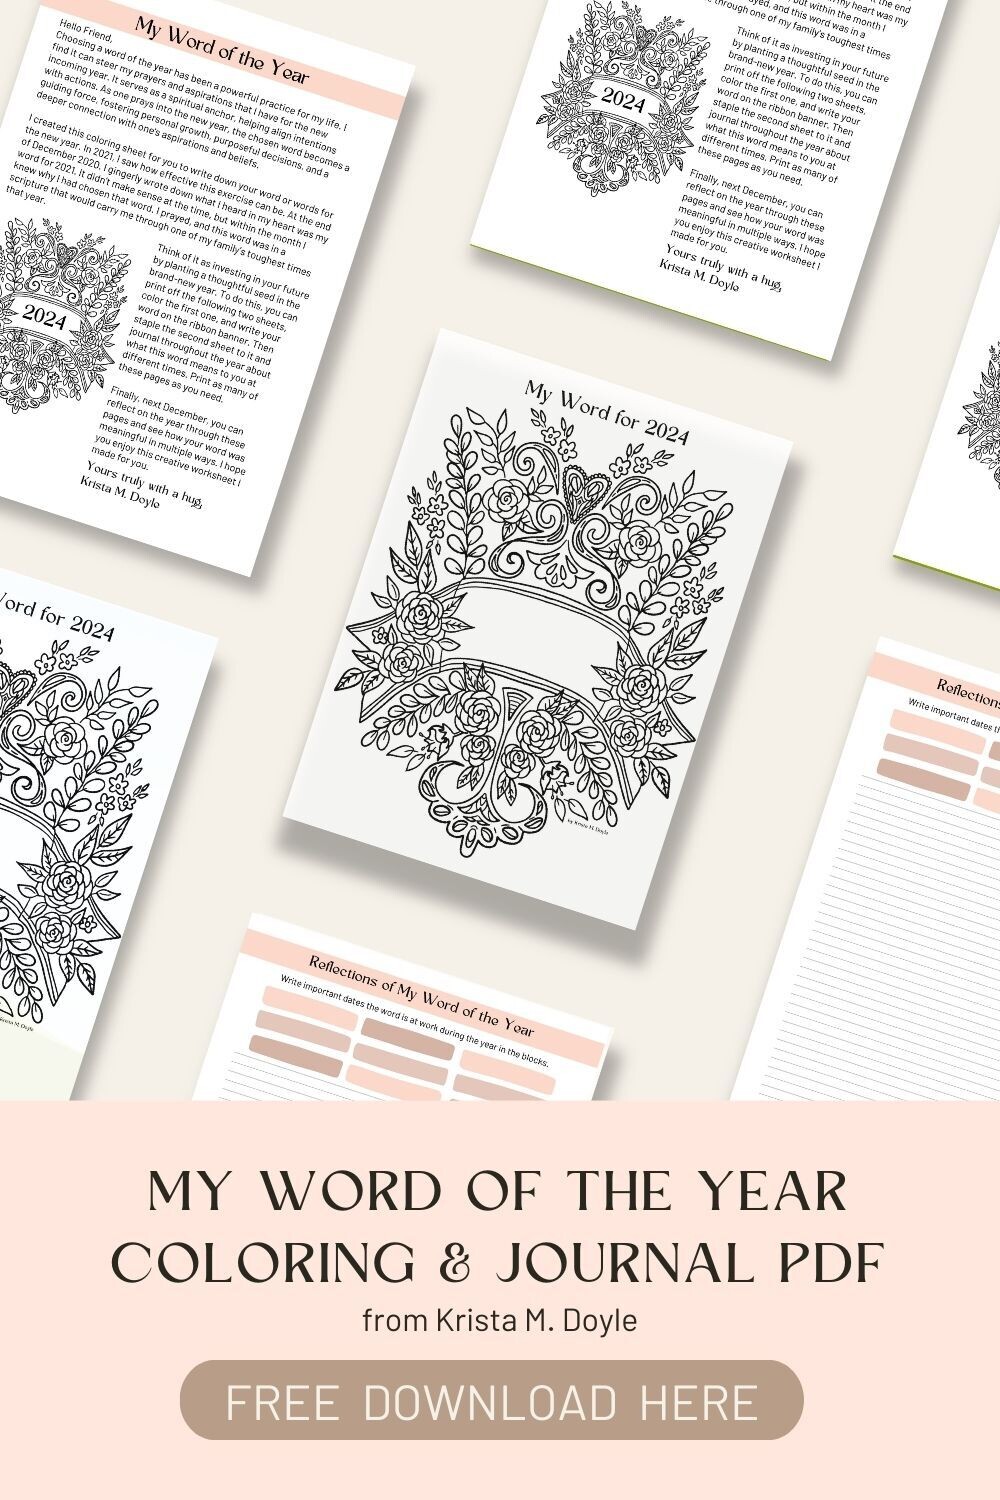 My Word of the Year Coloring & Journal Pages PDF Download -- Free or Choose Your Price